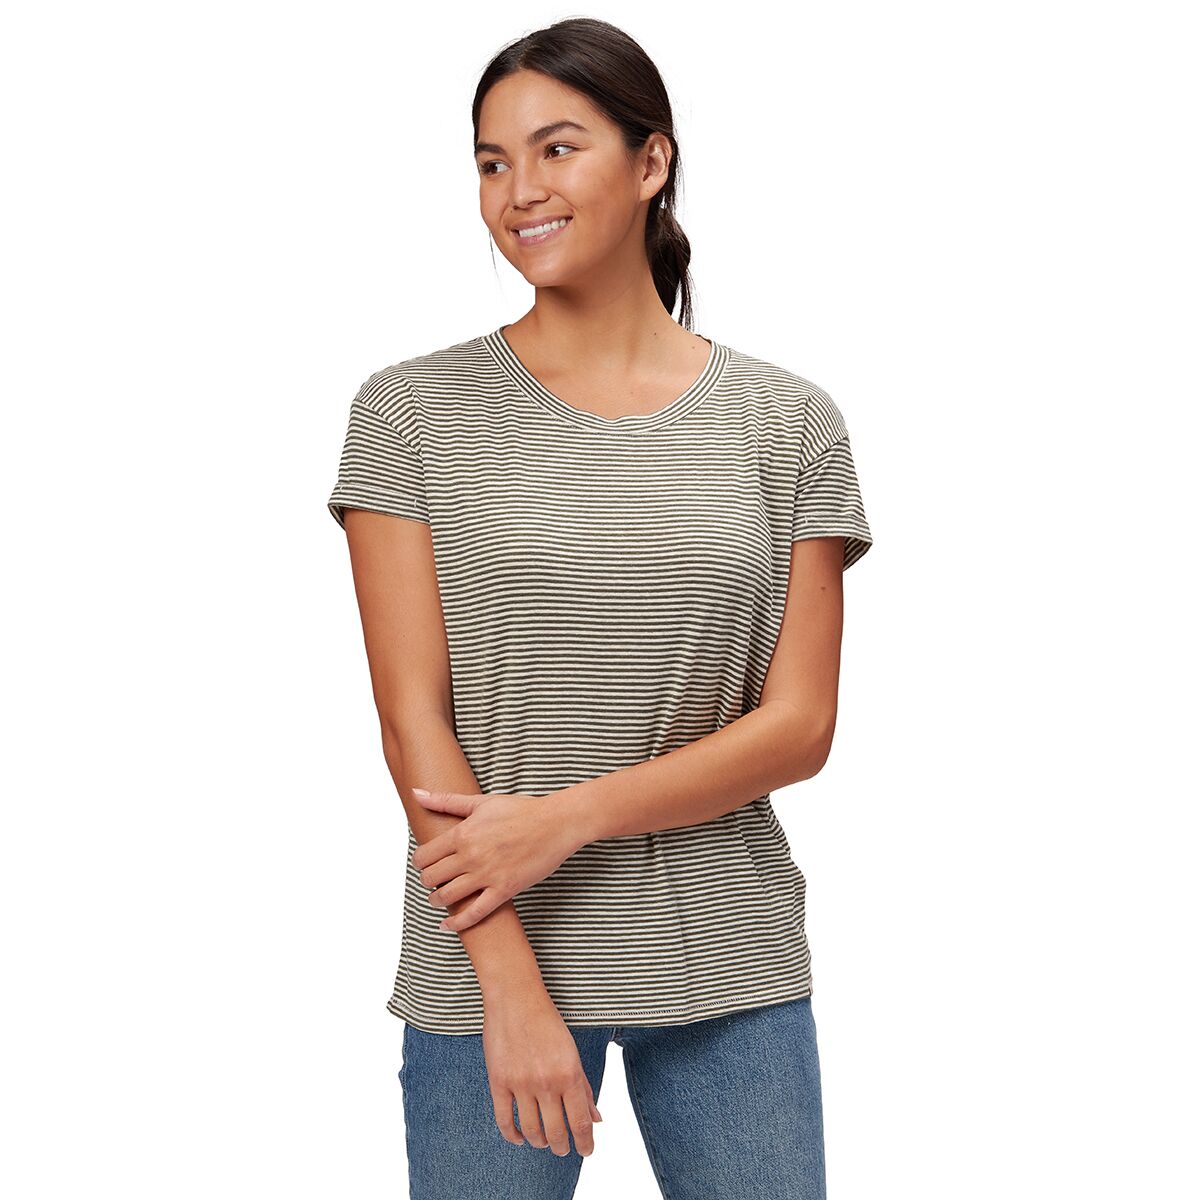 prAna, women's t-shirts and other short-sleeved shirts